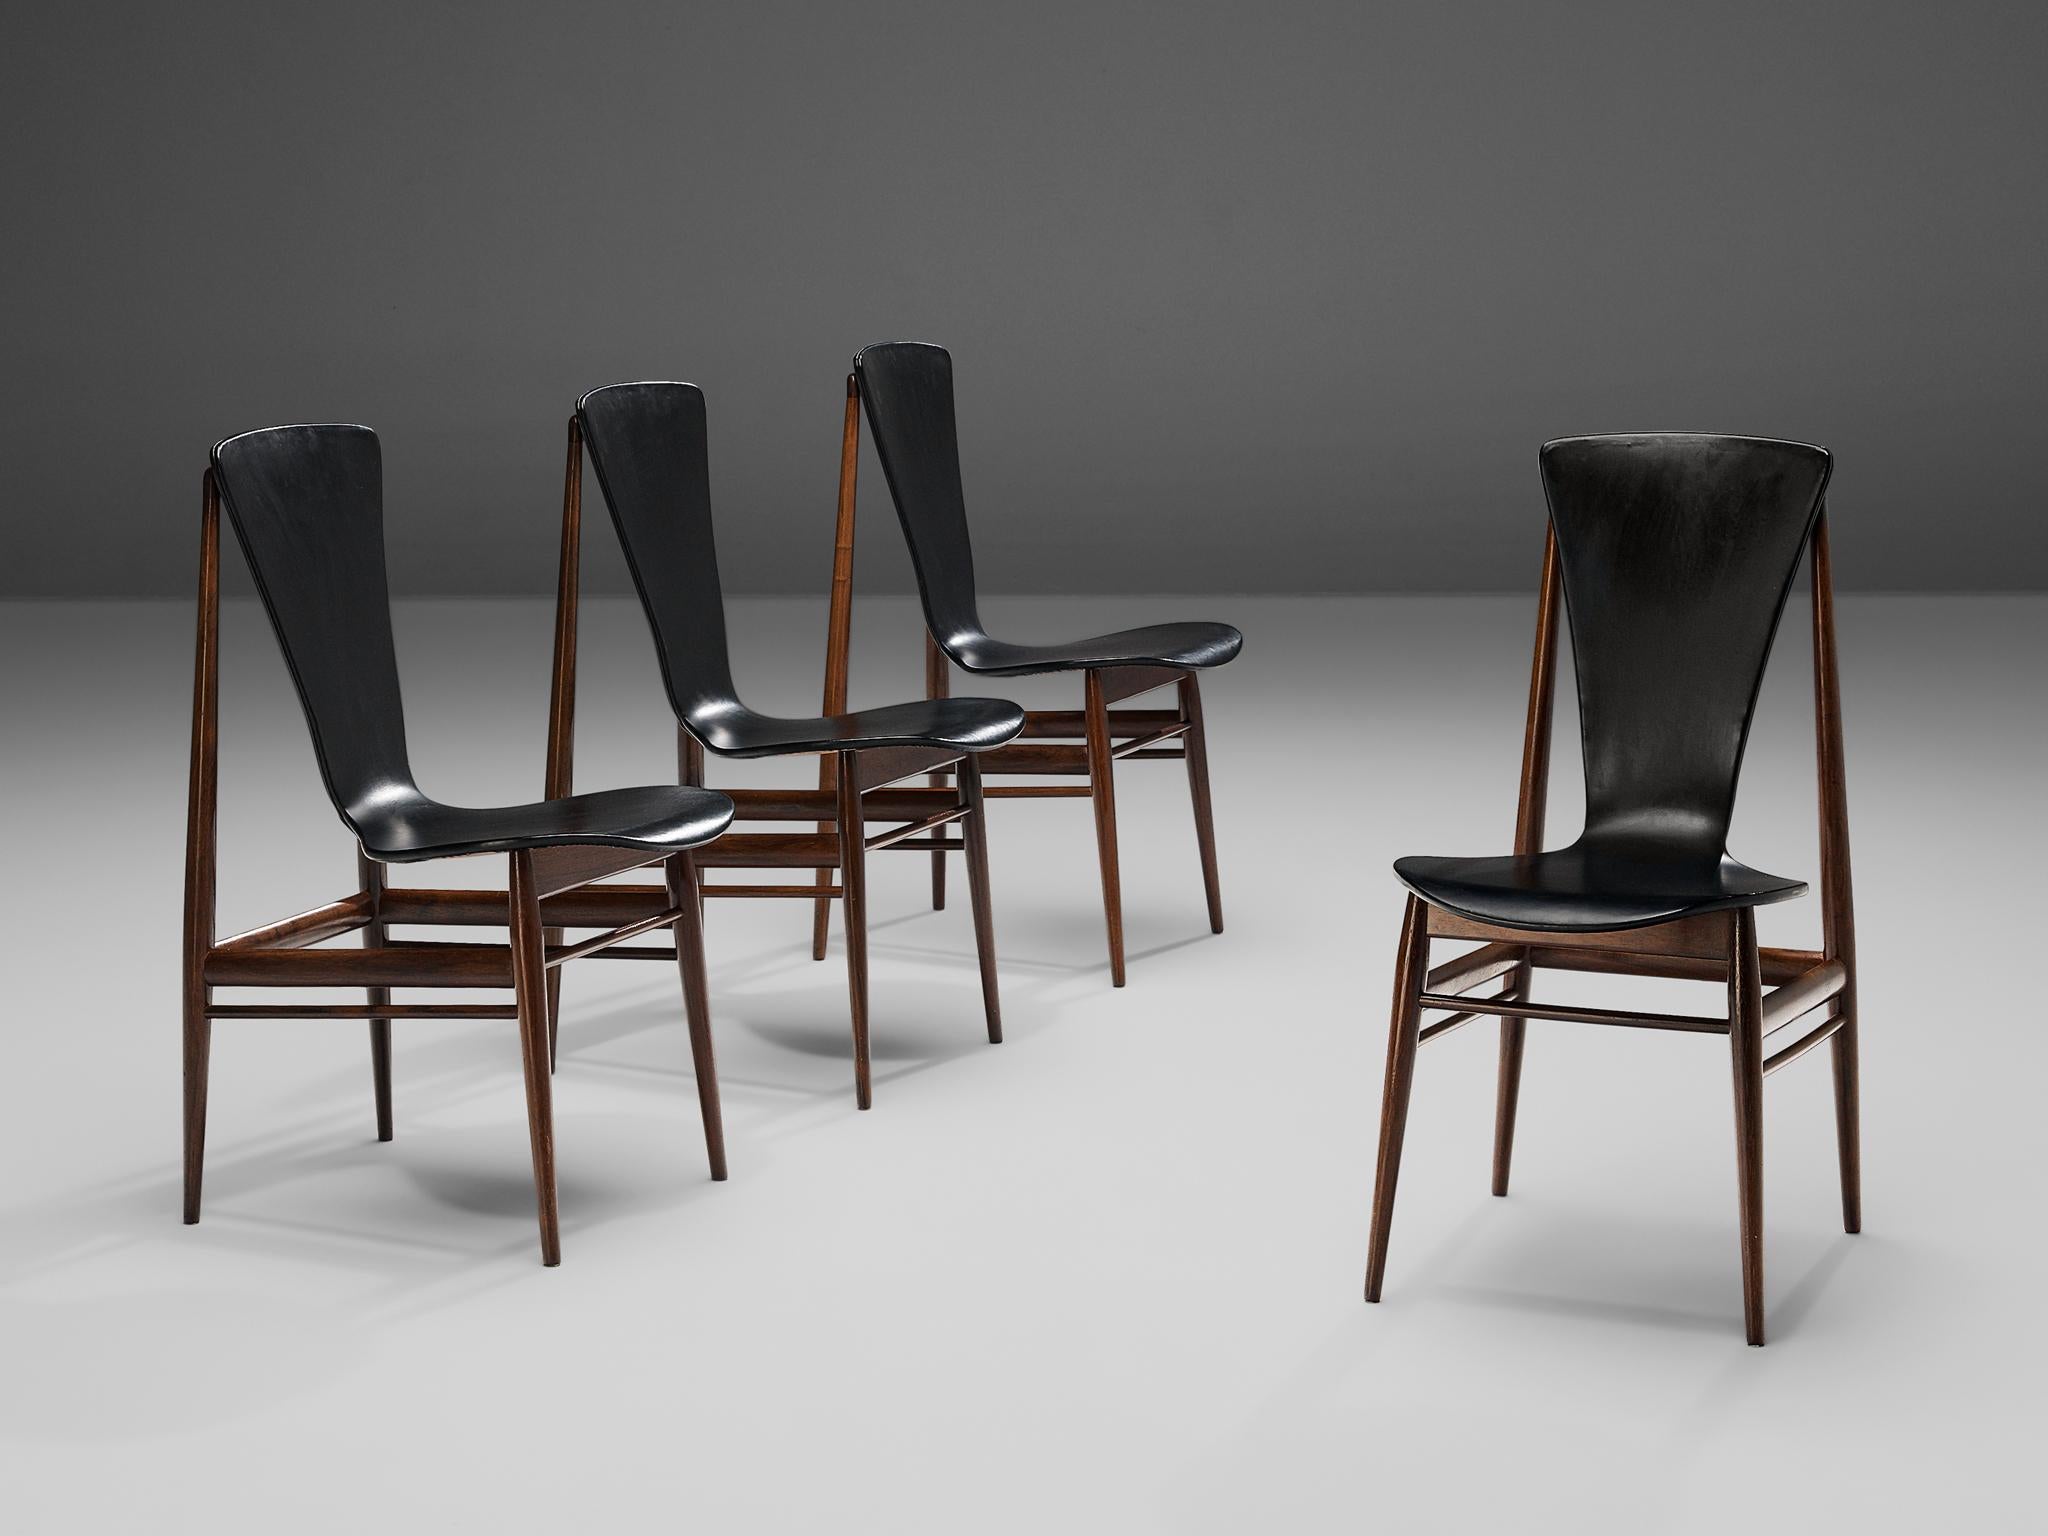 Set of four dining chairs, black leatherette, hardwood, Europe, 1960s

Elegant set of four dining chairs with strikingly airy design. A slim and tapered frame in tropical hardwood lifts up an hourglass shaped seating in black leatherette. The seats